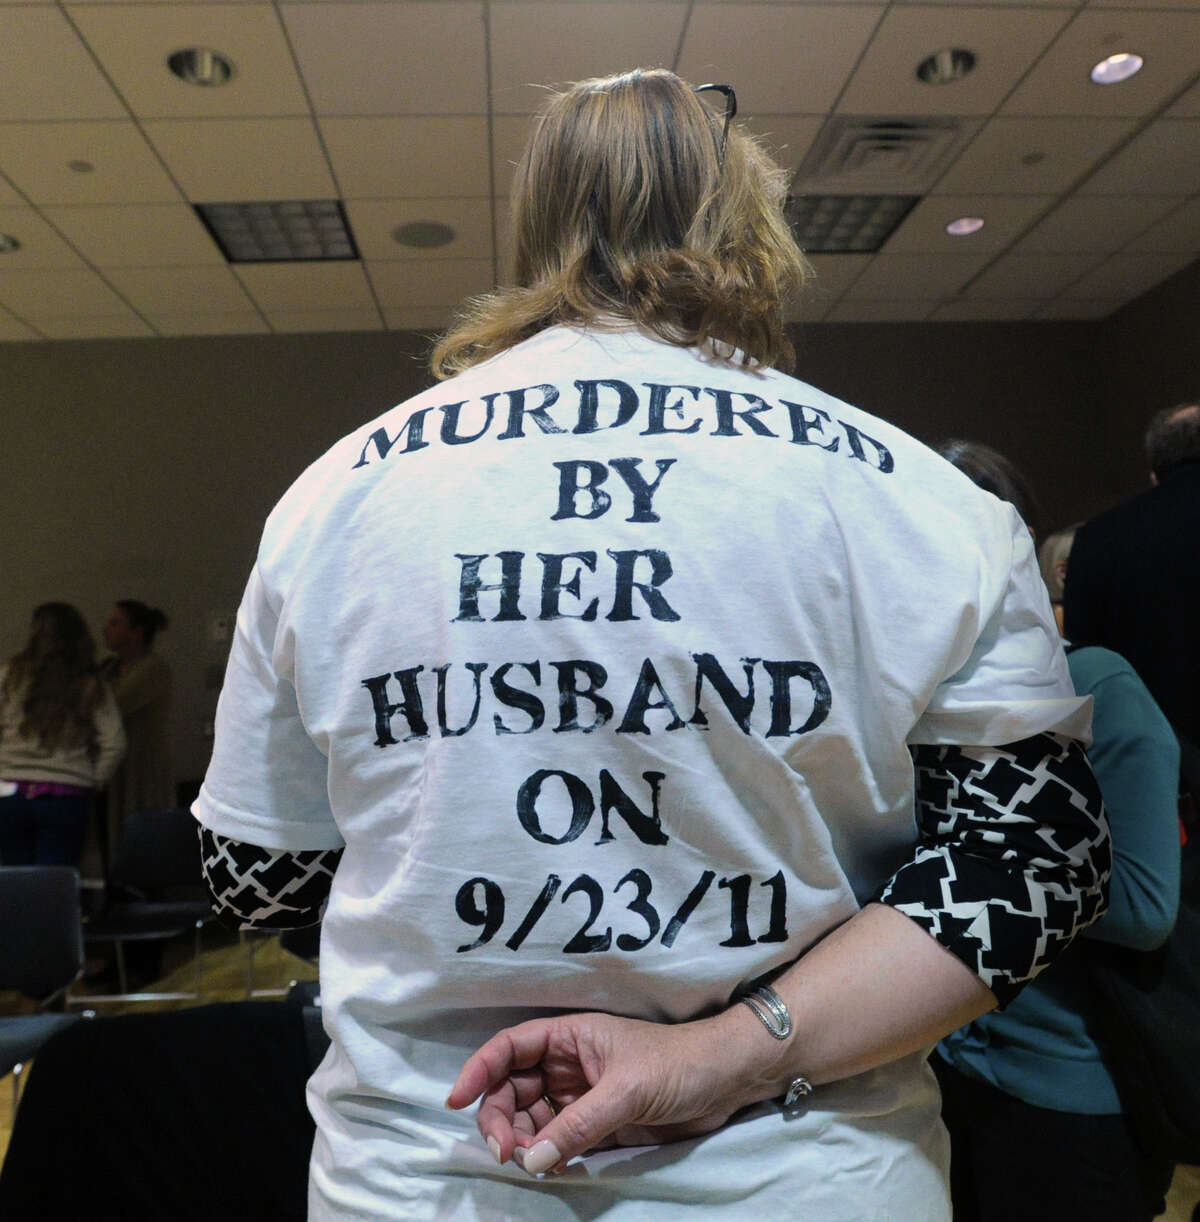 Lisa Corvese of Greenwich wears a shirt honoring the memory of Milford resident, Catherine Fox, who was killed by her husband on 9/23/11, during the YWCA Domestic Abuse Services in Greenwich, Thursday night, Oct. 25, 2012.